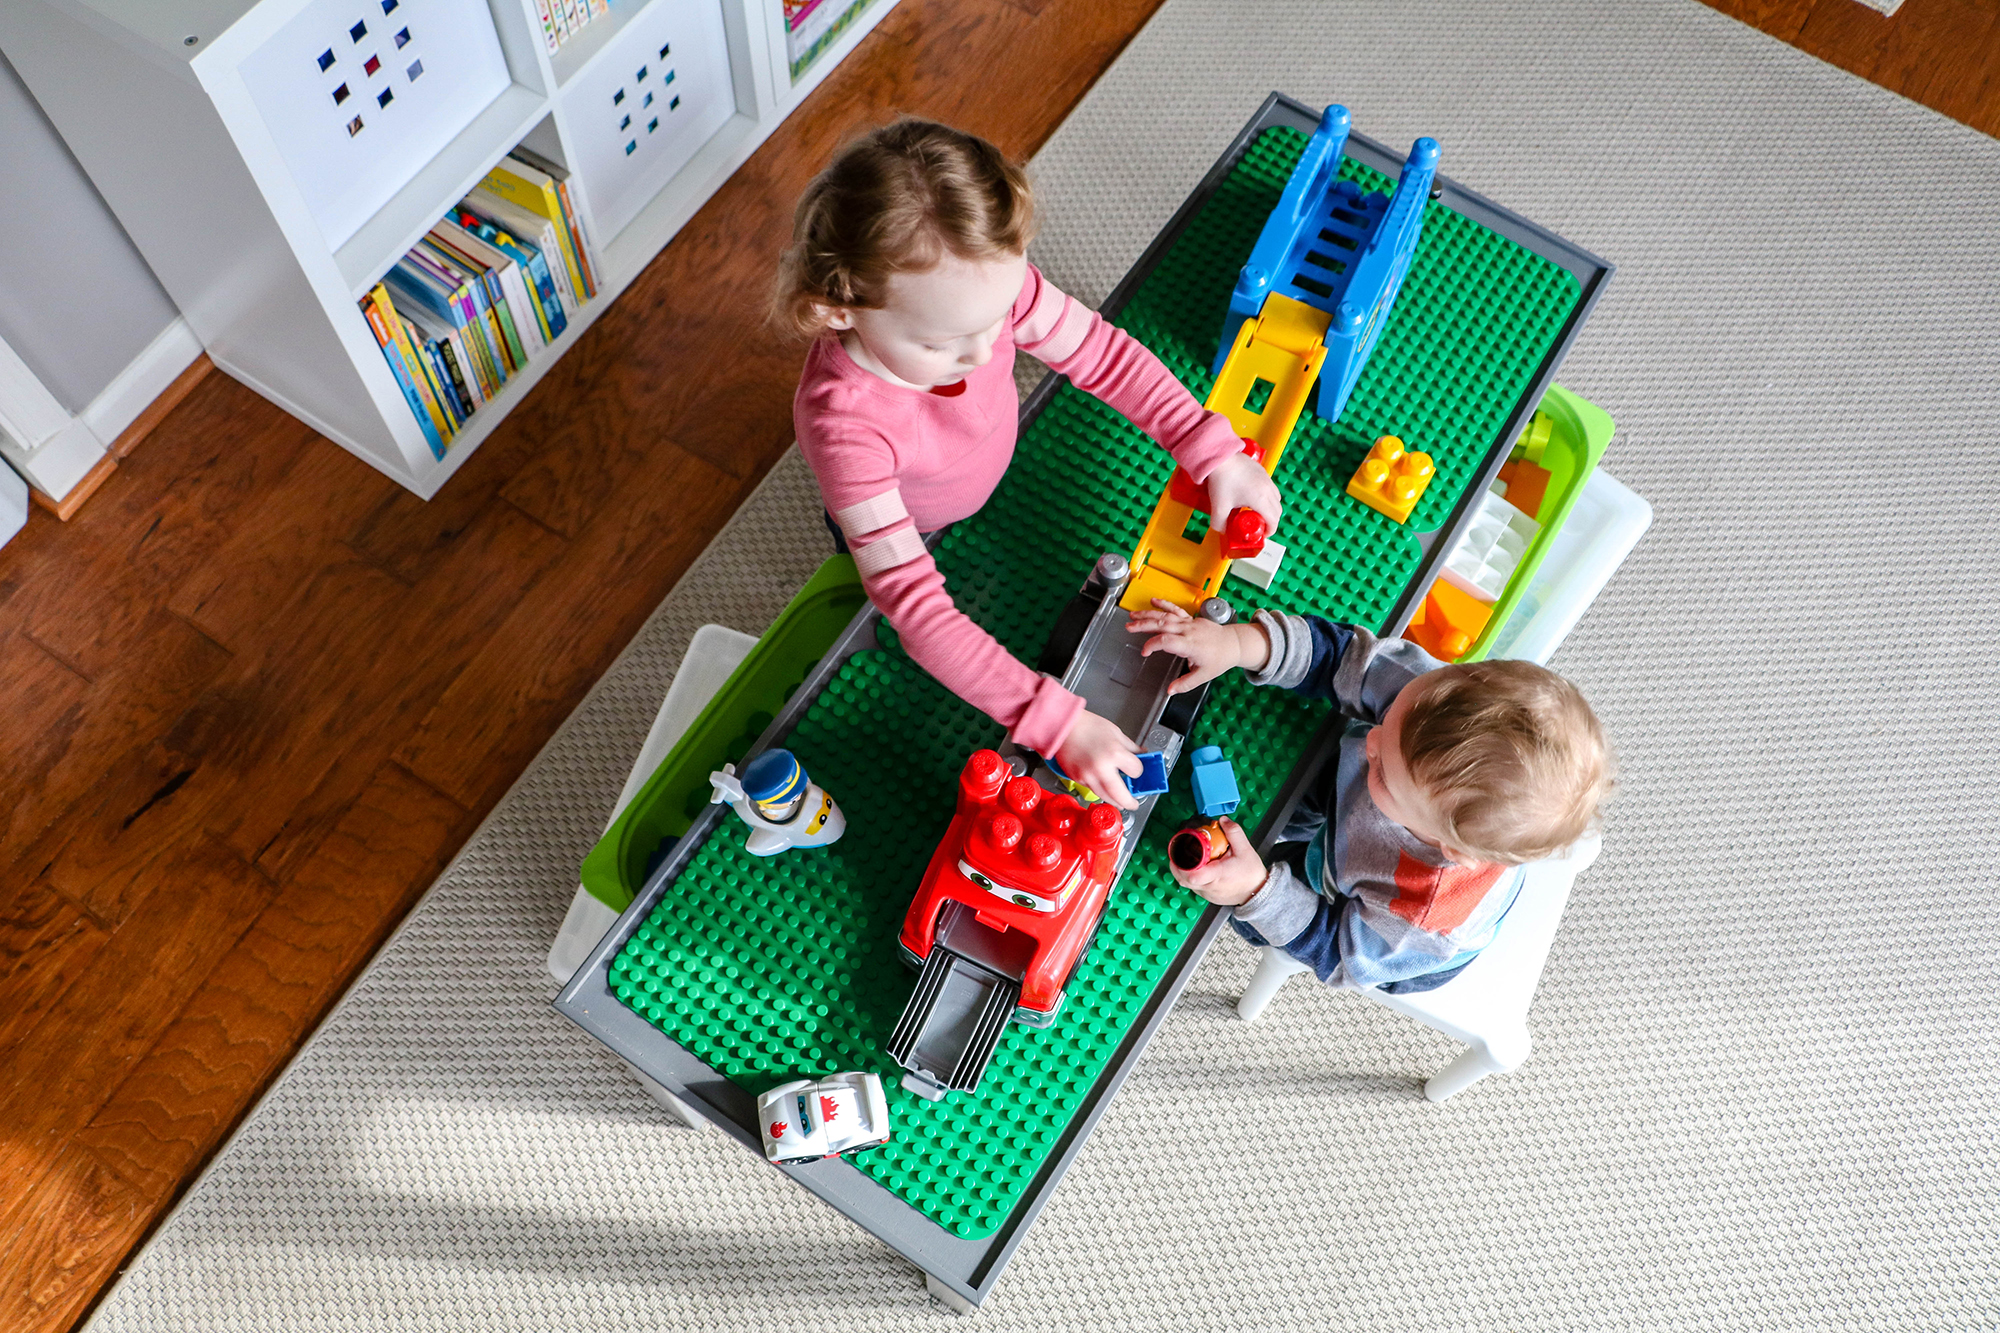 IKEA Hack: LACK Now a 3-in-1, Self-Contained, Slimline, Transforming DUPLO® / LEGO® Table